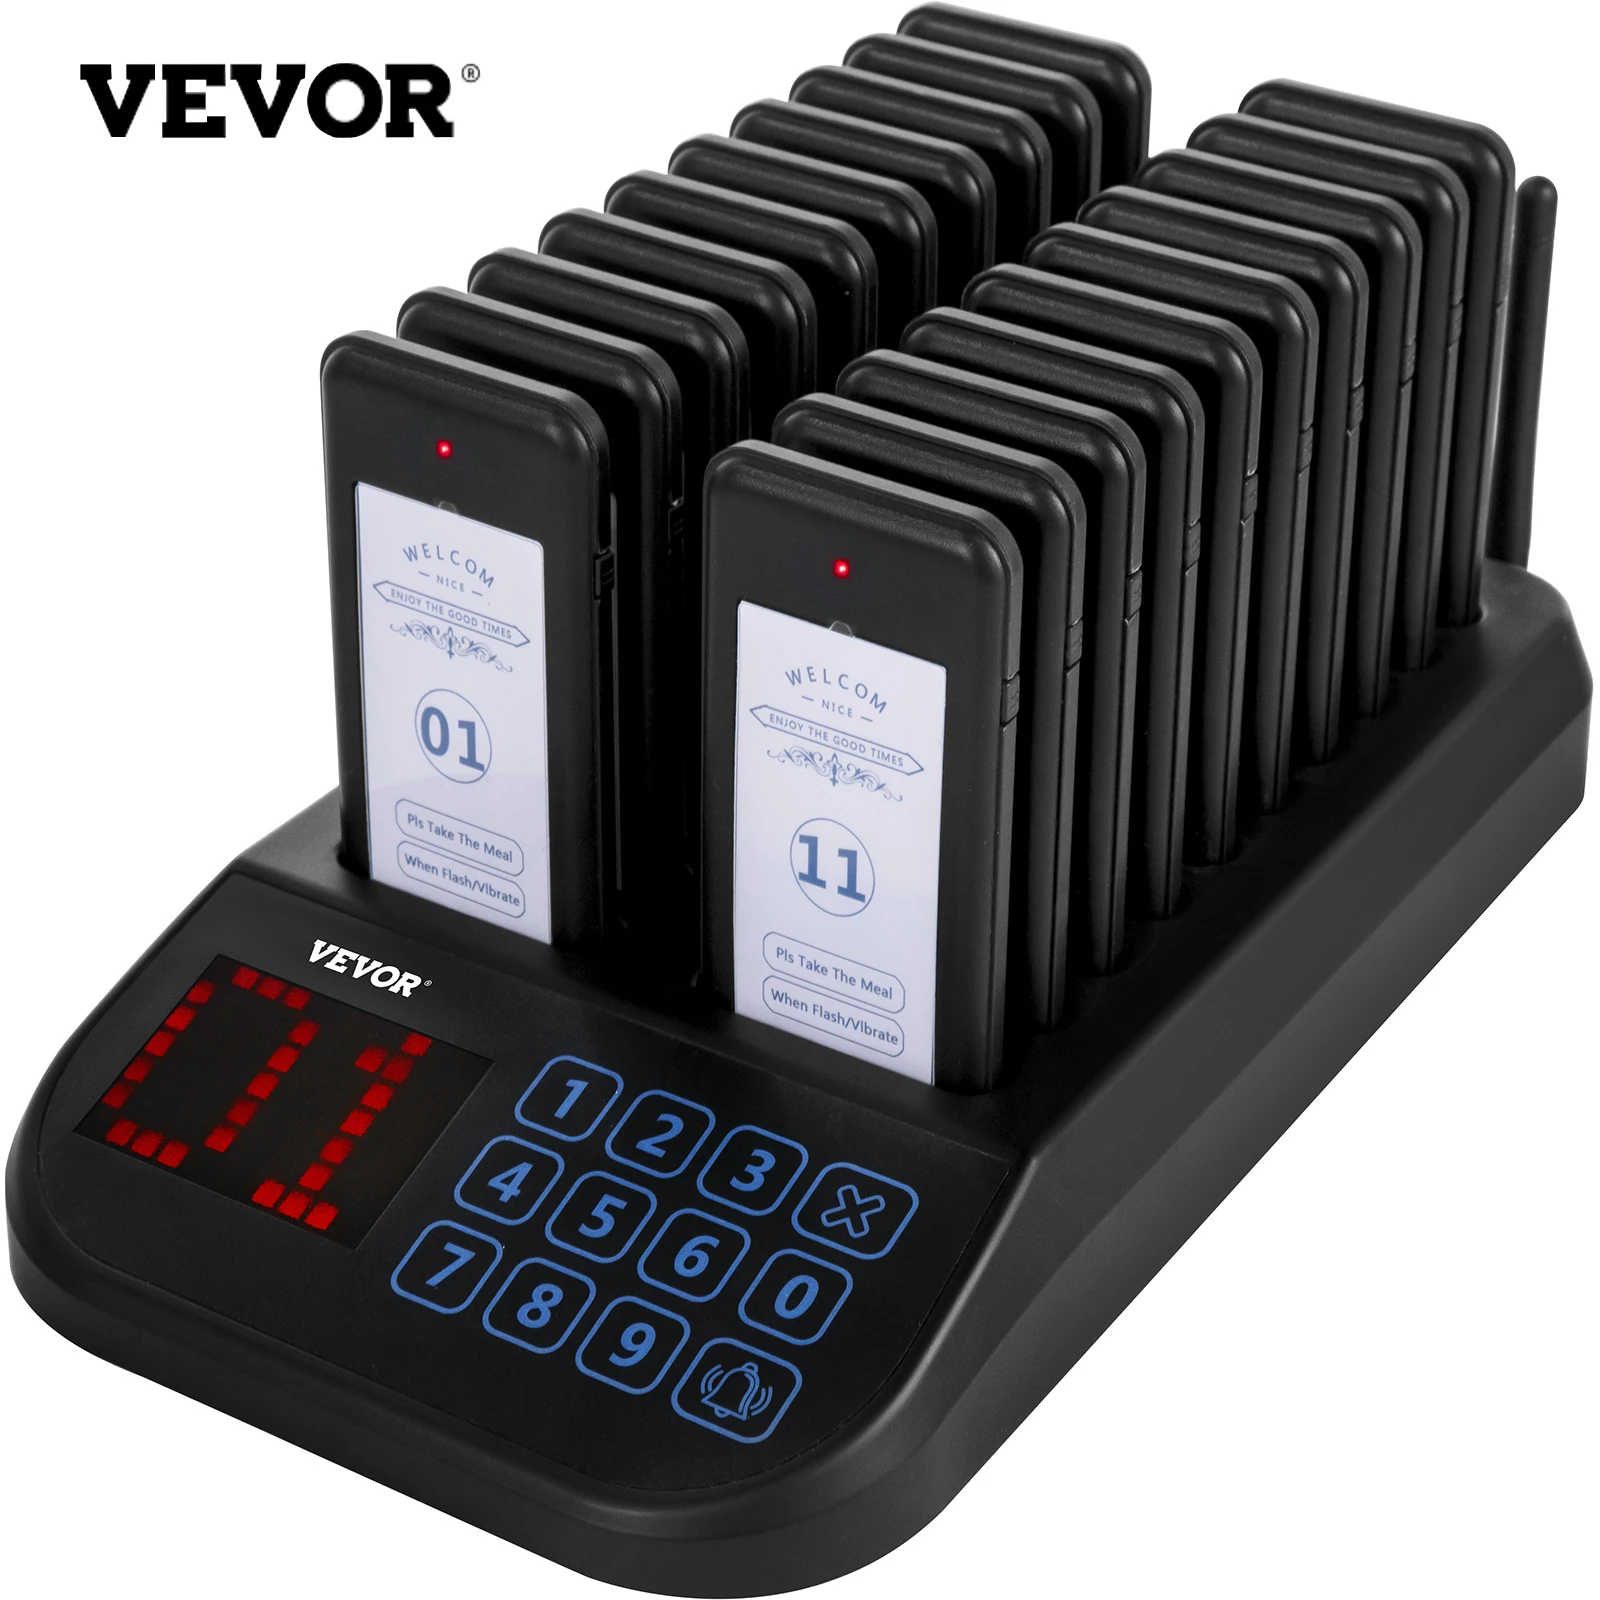 VEVOR Restaurant Pager Calling Paging System 20 Coaster Receiver Restaurants Church Nurse Clinic Queue System Wireless Pagers